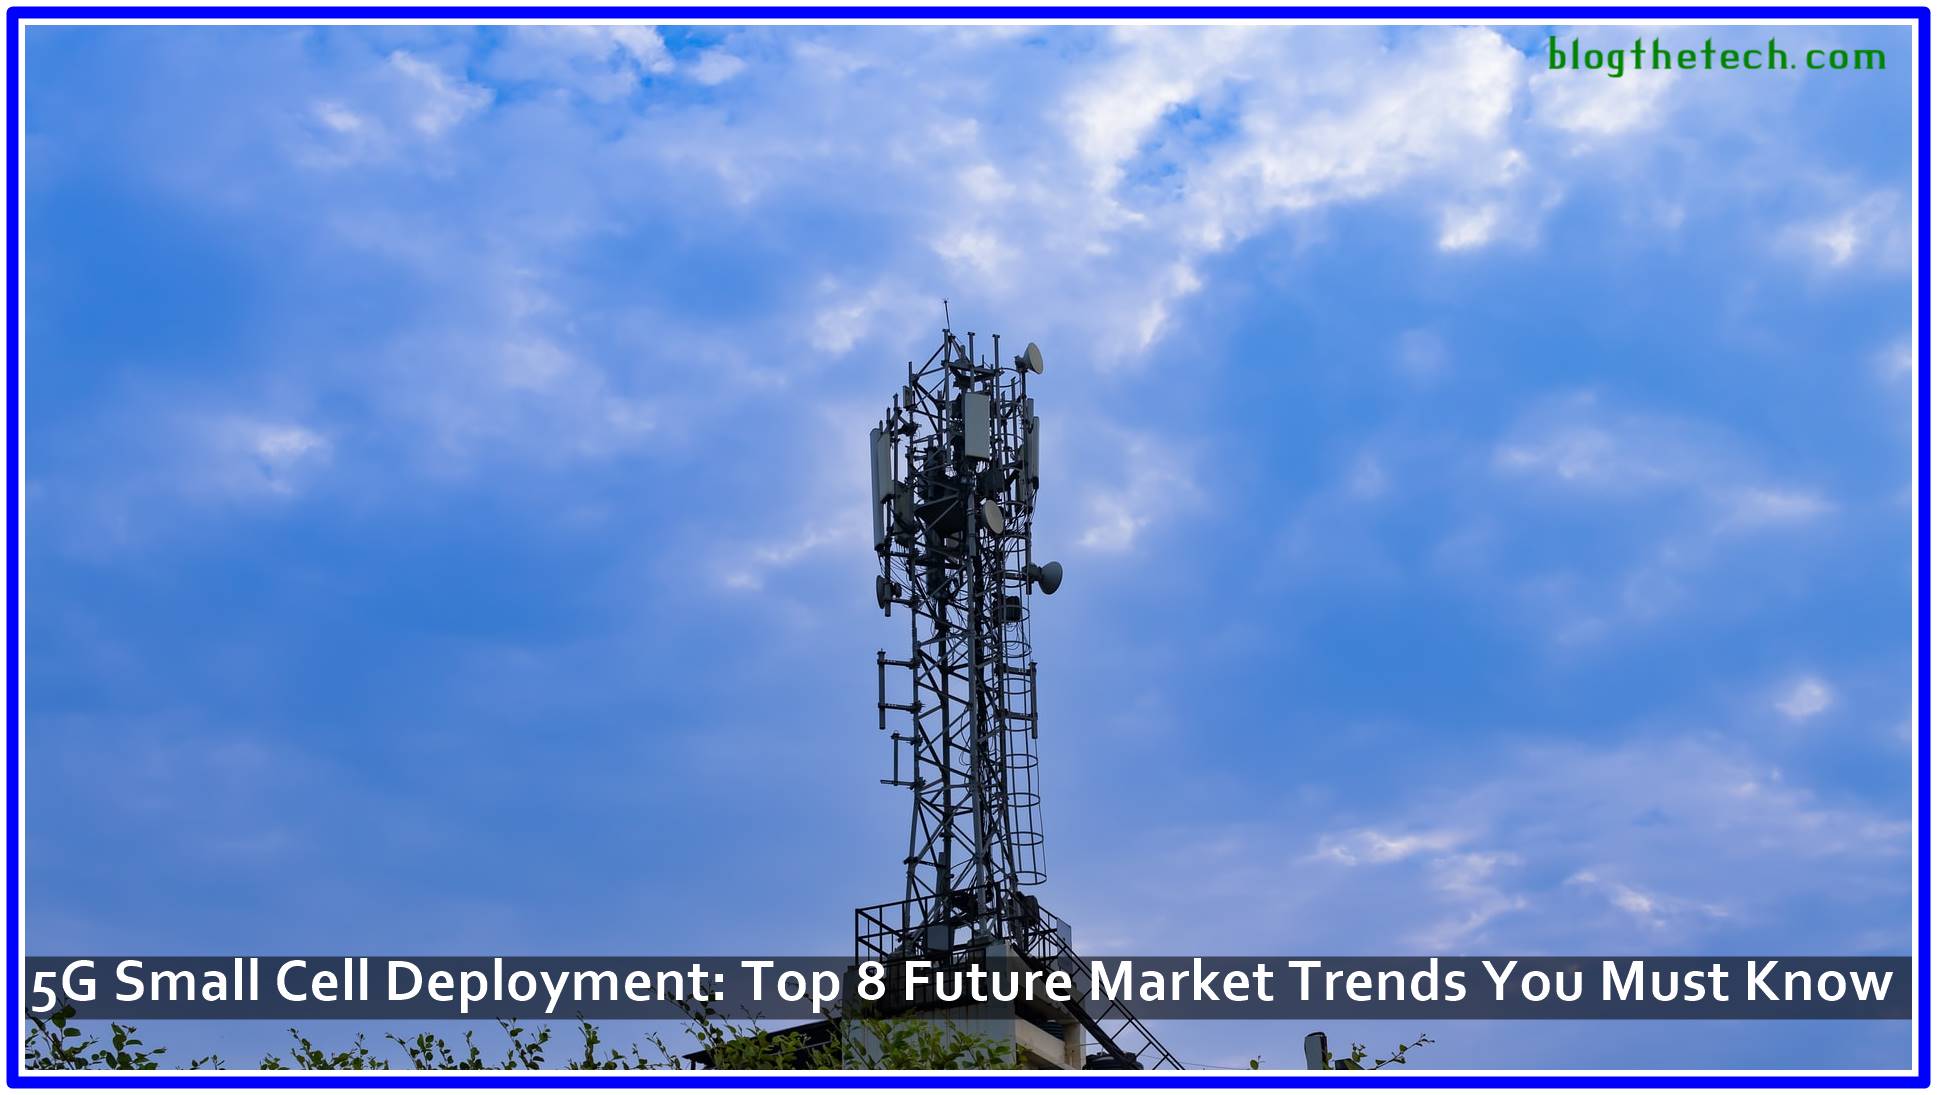 5G Small Cell Deployment: Top 8 Future Market Trends You Must Know